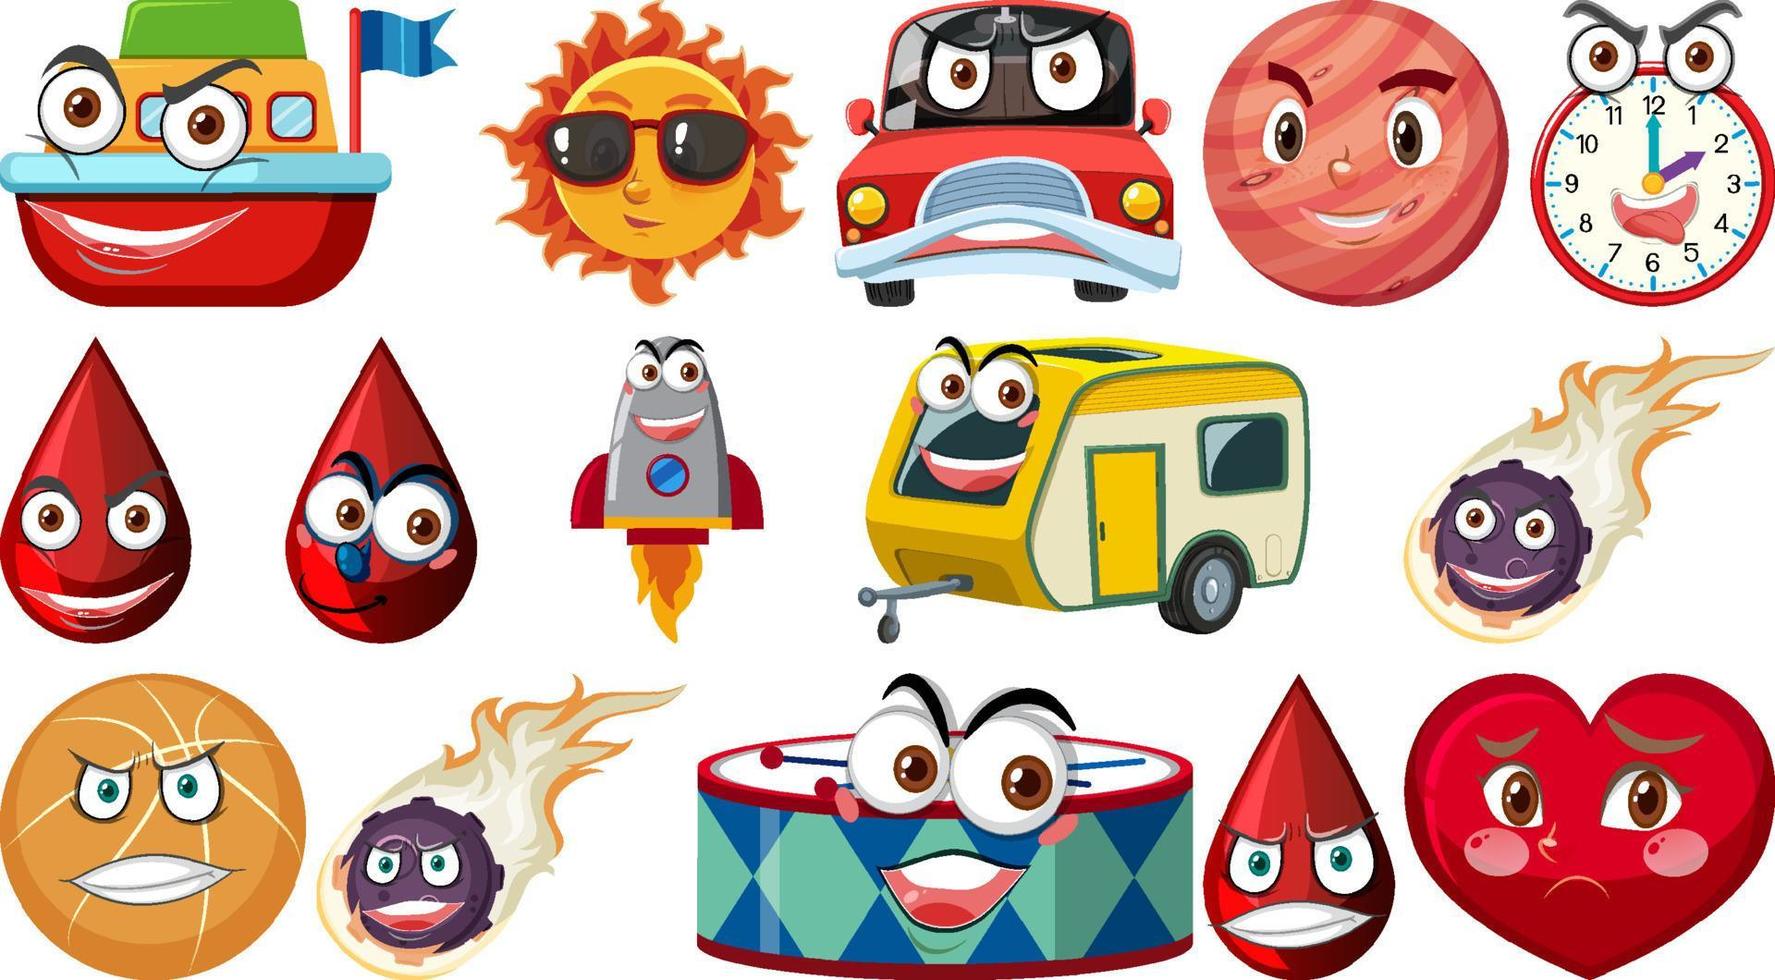 Set of different toy objects with faces vector